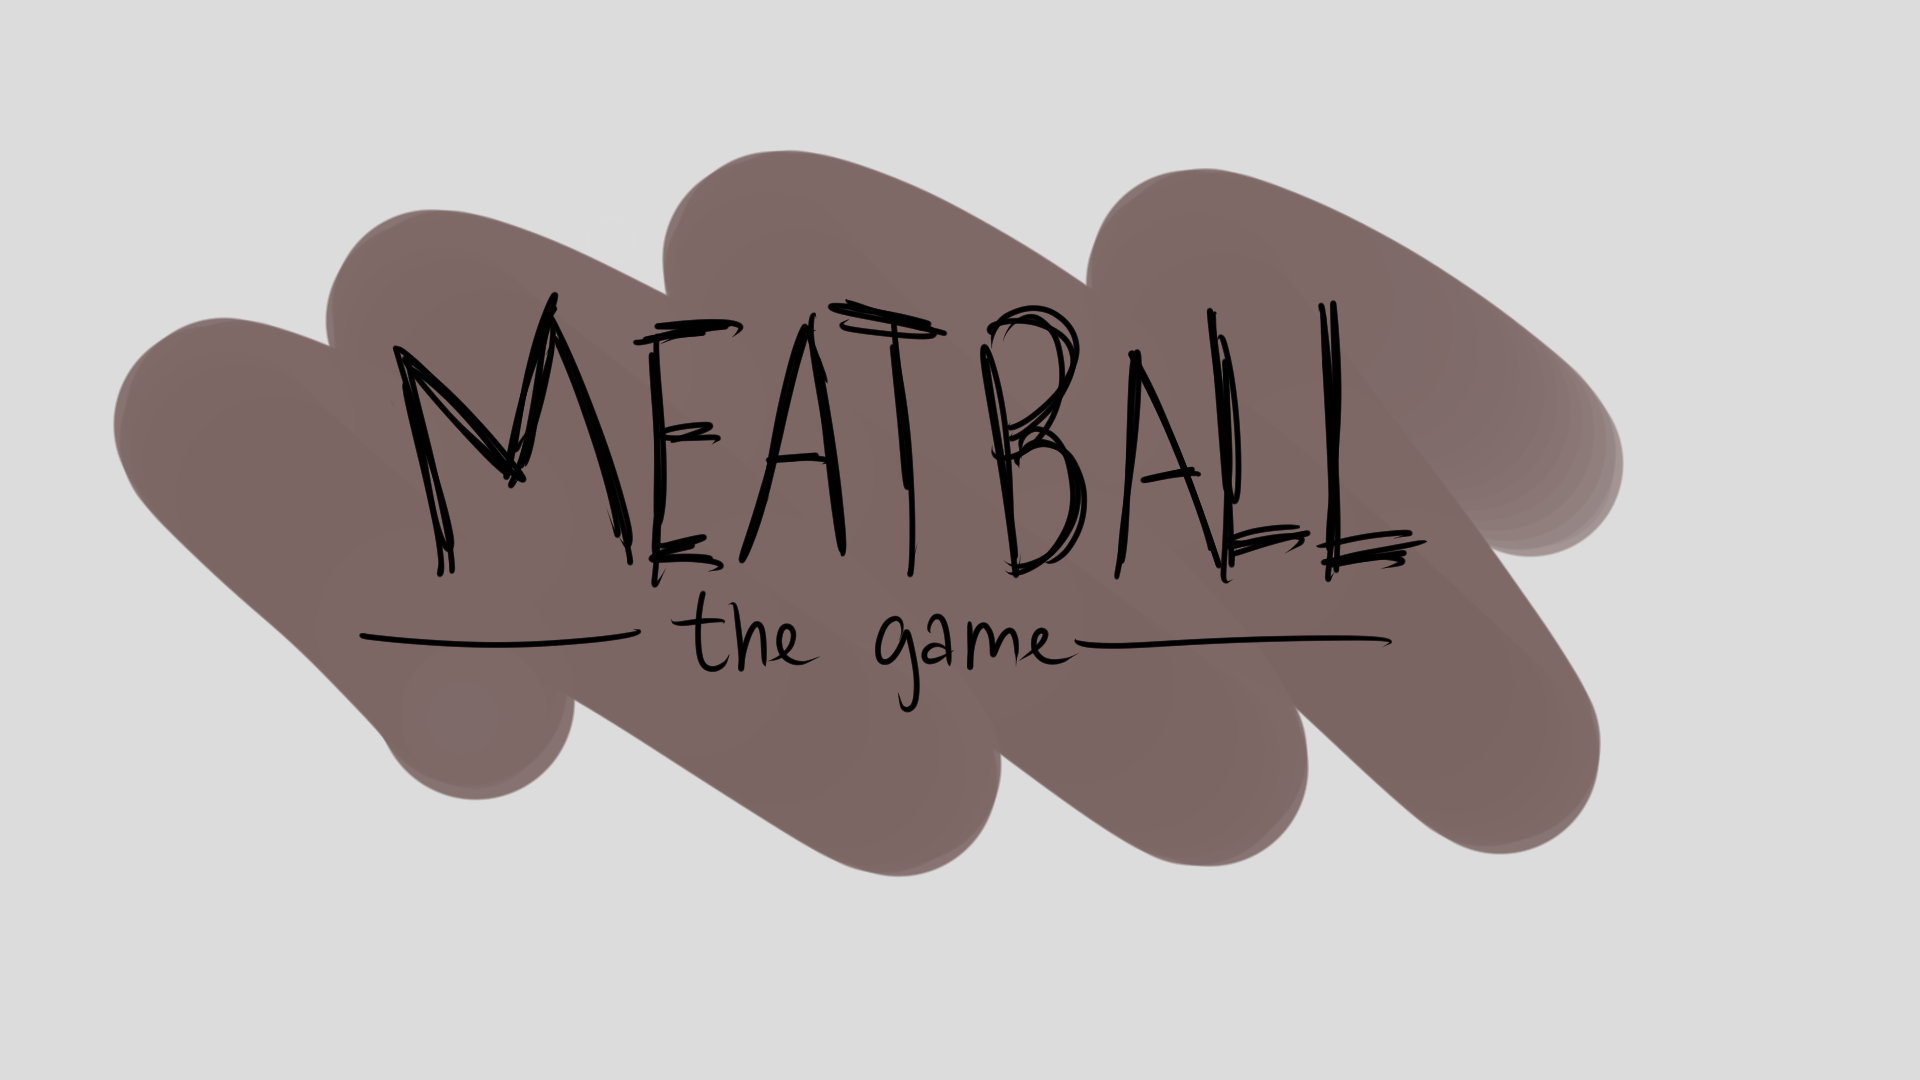 Meatball: The Game